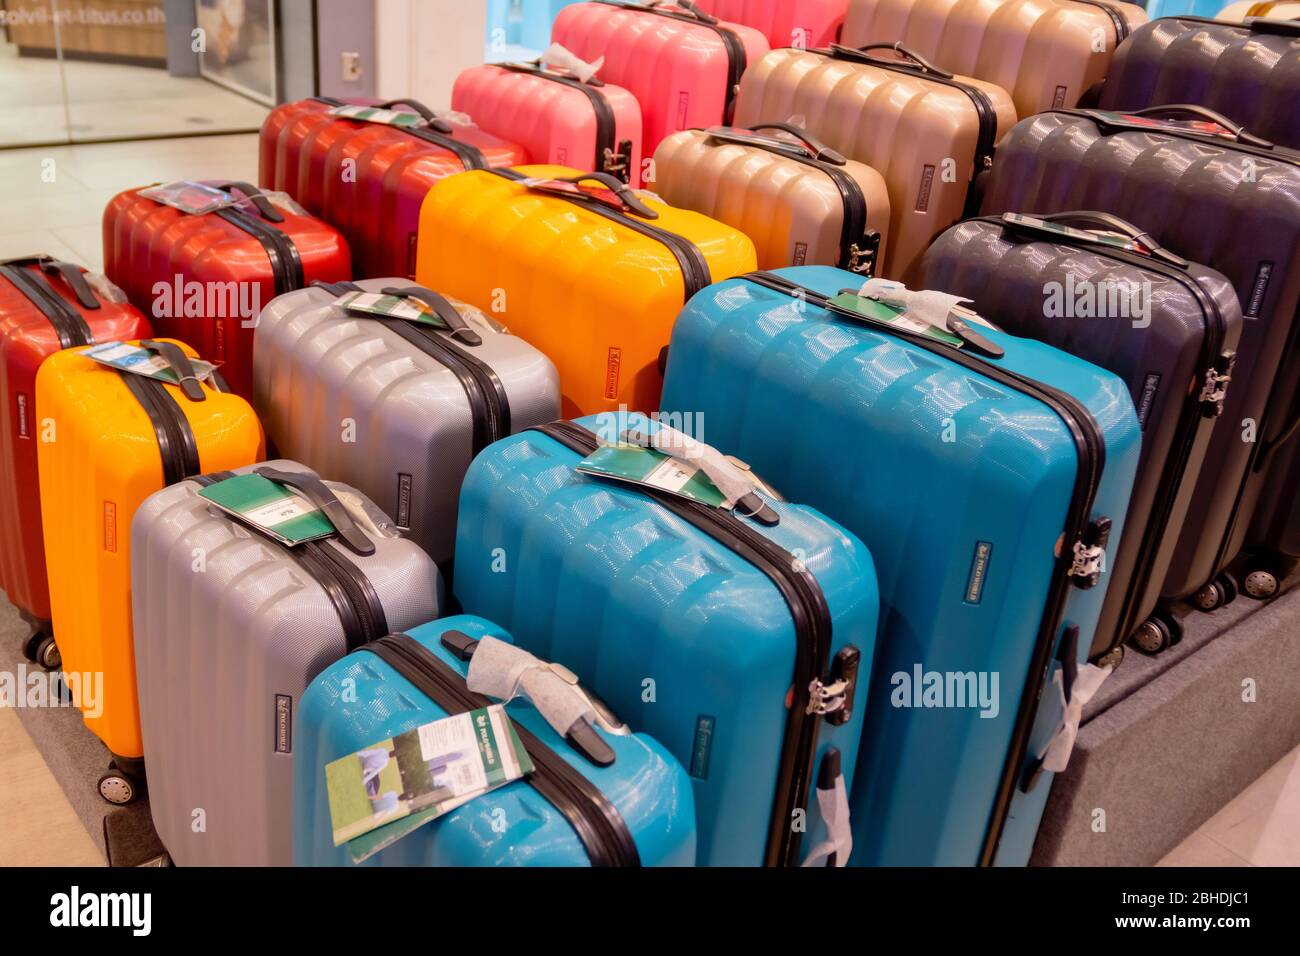 The New elegant colorful travelling bag stacked and shown to the customer  in Blueport shopping mall Hua Hin, Thailand February 15, 2019 Stock Photo -  Alamy